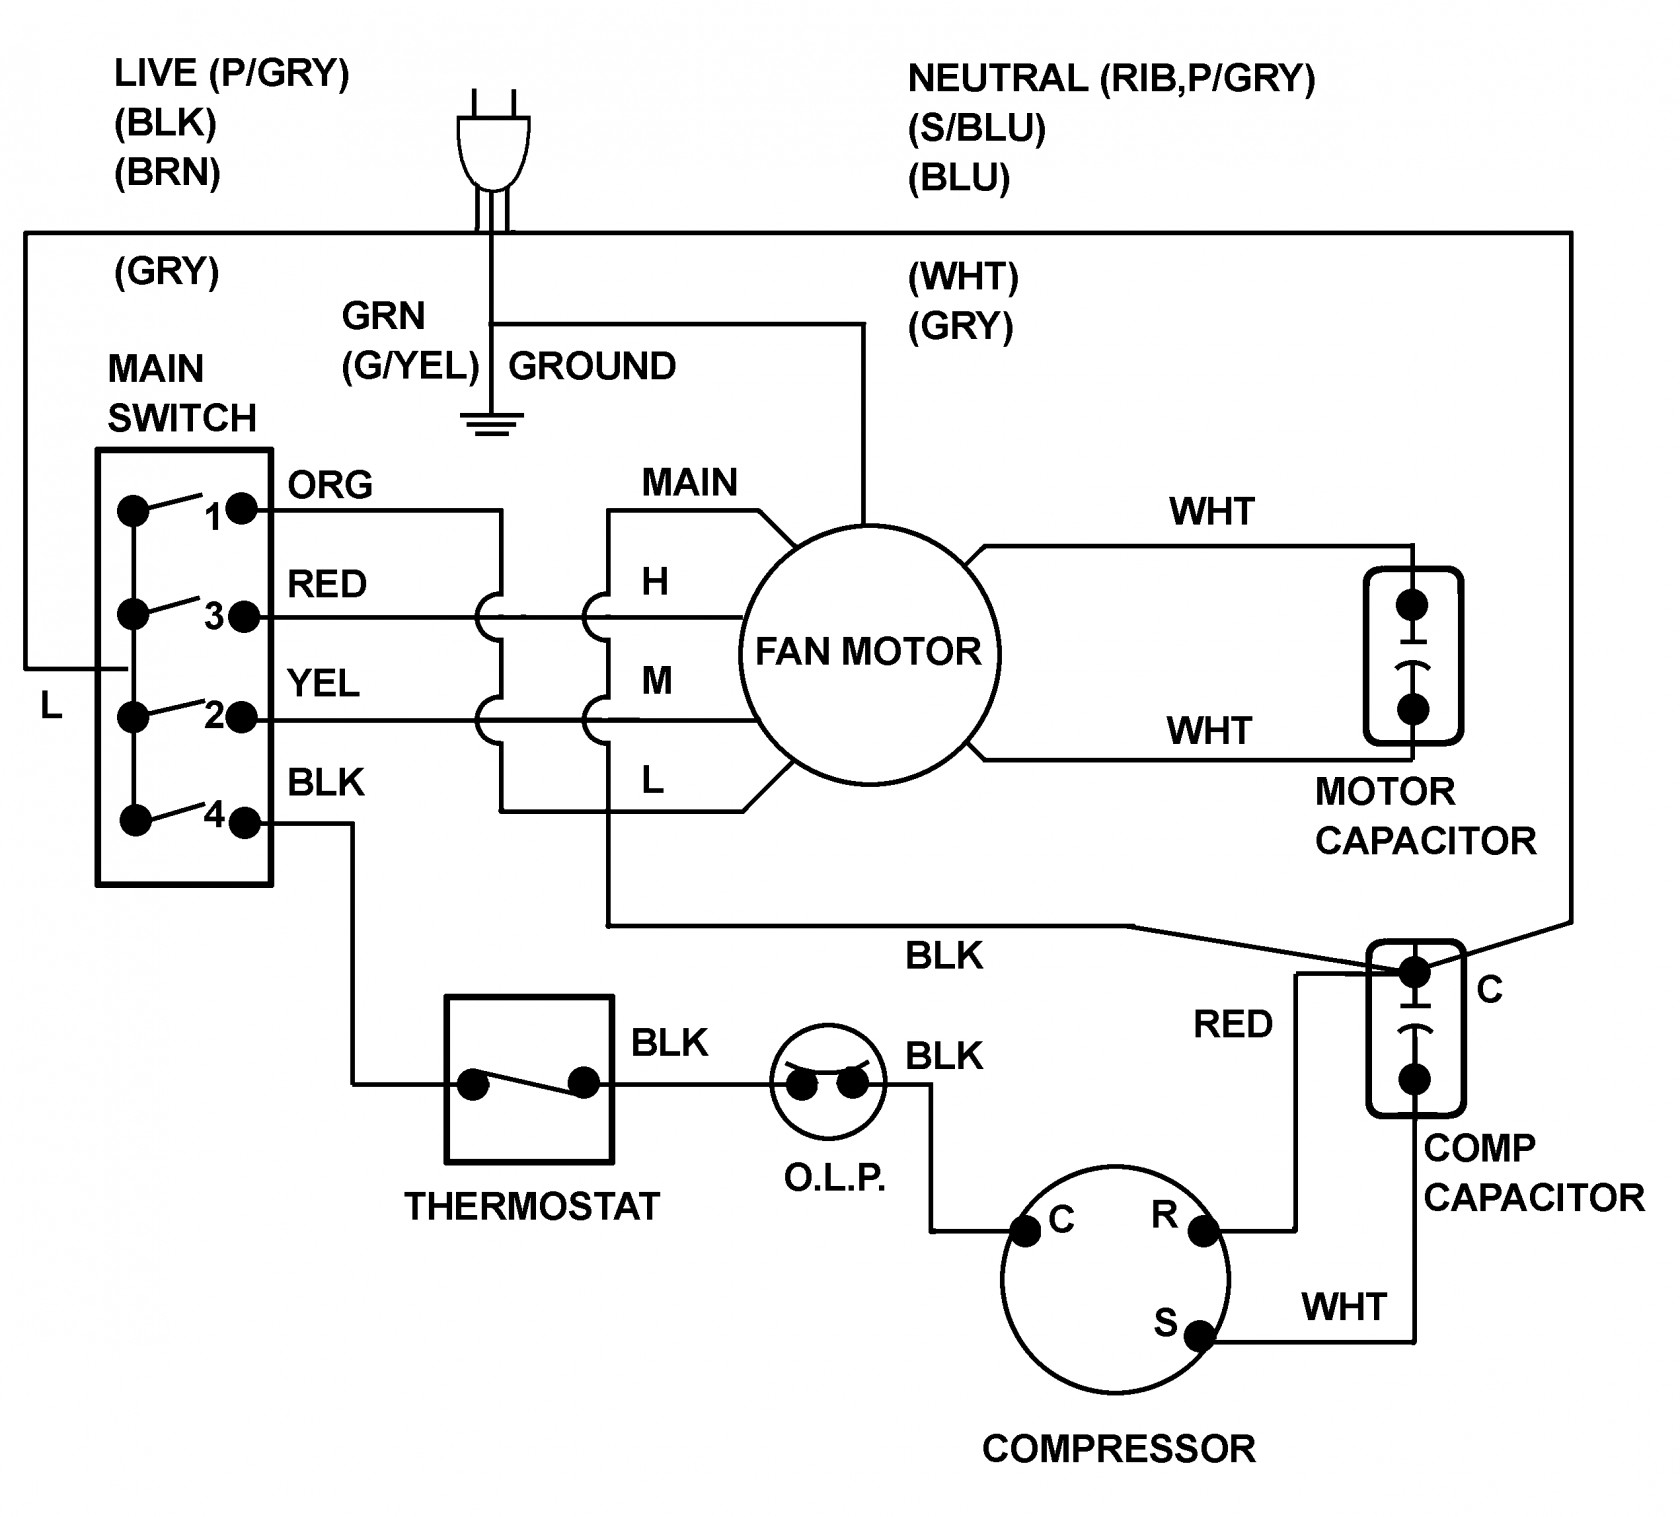 Ac Fan Capacitor Wiring Diagram | Wiring Library - Capacitor Wiring Diagram